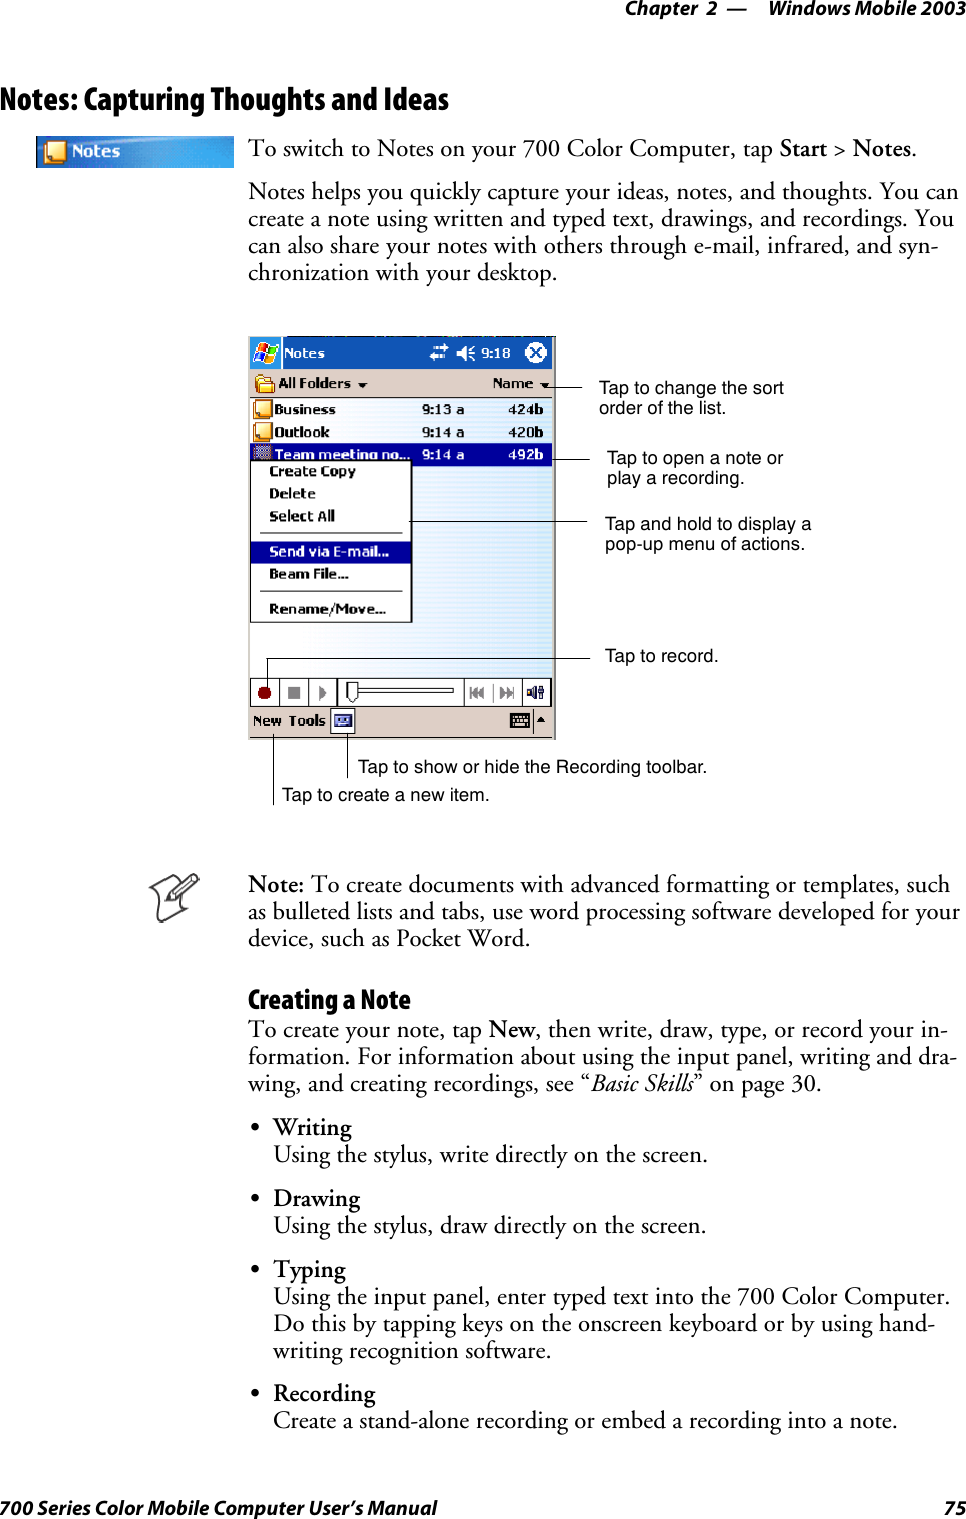 Windows Mobile 2003—Chapter 275700 Series Color Mobile Computer User’s ManualNotes: Capturing Thoughts and IdeasTo switch to Notes on your 700 Color Computer, tap Start &gt;Notes.Notes helps you quickly capture your ideas, notes, and thoughts. You cancreate a note using written and typed text, drawings, and recordings. Youcan also share your notes with others through e-mail, infrared, and syn-chronization with your desktop.Tap to change the sortorder of the list.Tap to create a new item.Taptoopenanoteorplay a recording.Tap and hold to display apop-up menu of actions.Tap to record.Tap to show or hide the Recording toolbar.Note: To create documents with advanced formatting or templates, suchasbulletedlistsandtabs,usewordprocessingsoftwaredevelopedforyourdevice, such as Pocket Word.Creating a NoteTo create your note, tap New,thenwrite,draw,type,orrecordyourin-formation. For information about using the input panel, writing and dra-wing, and creating recordings, see “Basic Skills” on page 30.SWritingUsing the stylus, write directly on the screen.SDrawingUsing the stylus, draw directly on the screen.STypingUsing the input panel, enter typed text into the 700 Color Computer.Do this by tapping keys on the onscreen keyboard or by using hand-writing recognition software.SRecordingCreate a stand-alone recording or embed a recording into a note.